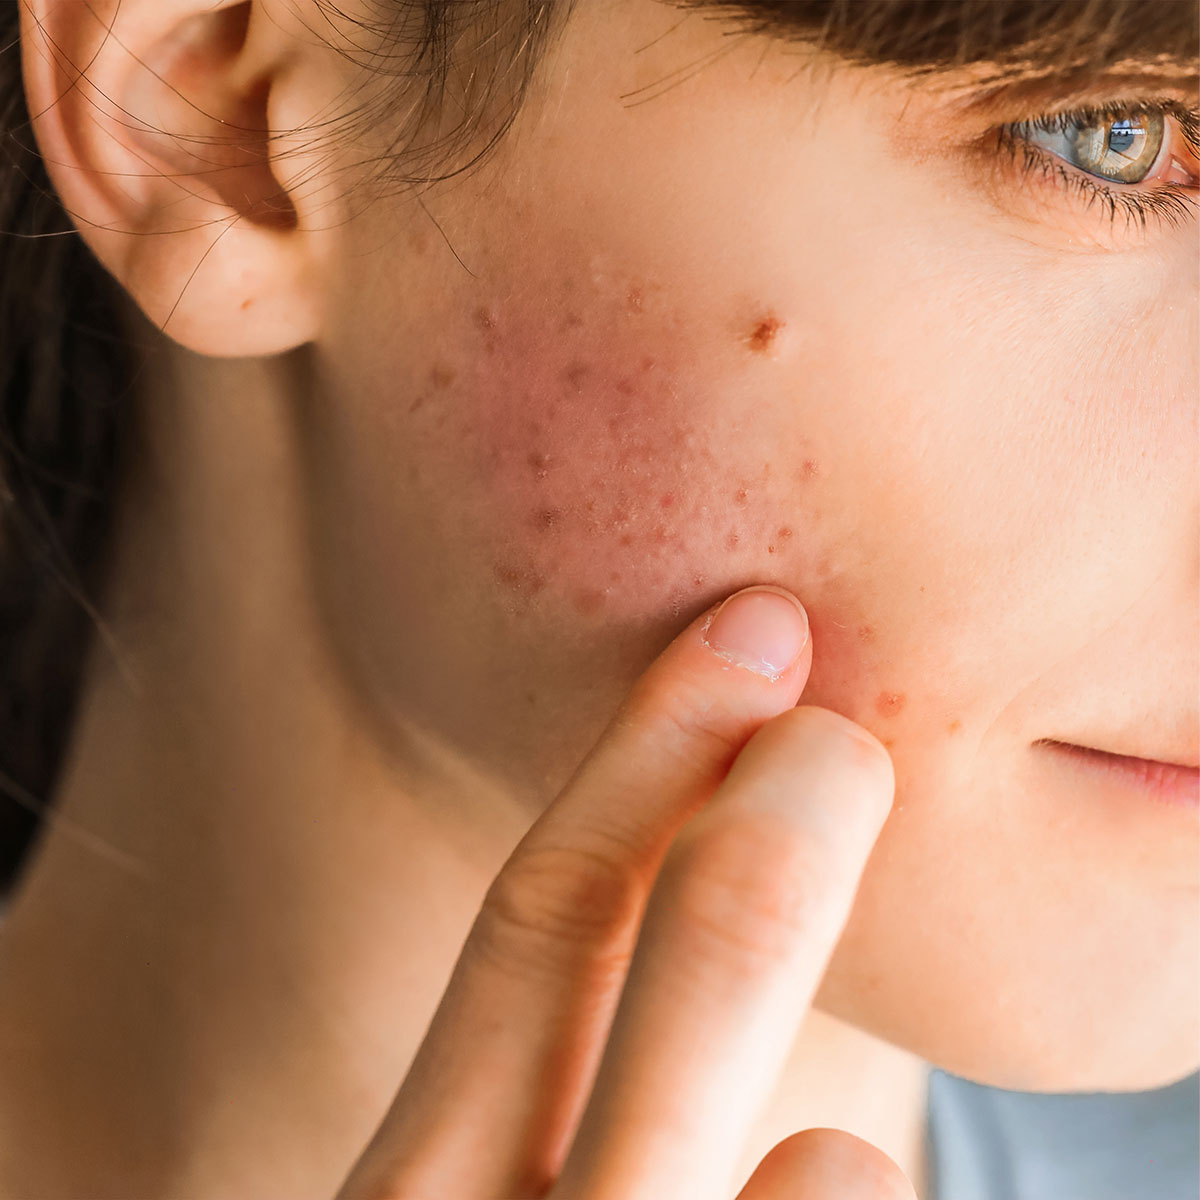 woman touching acne-inflamed scarred infected broken out red skin